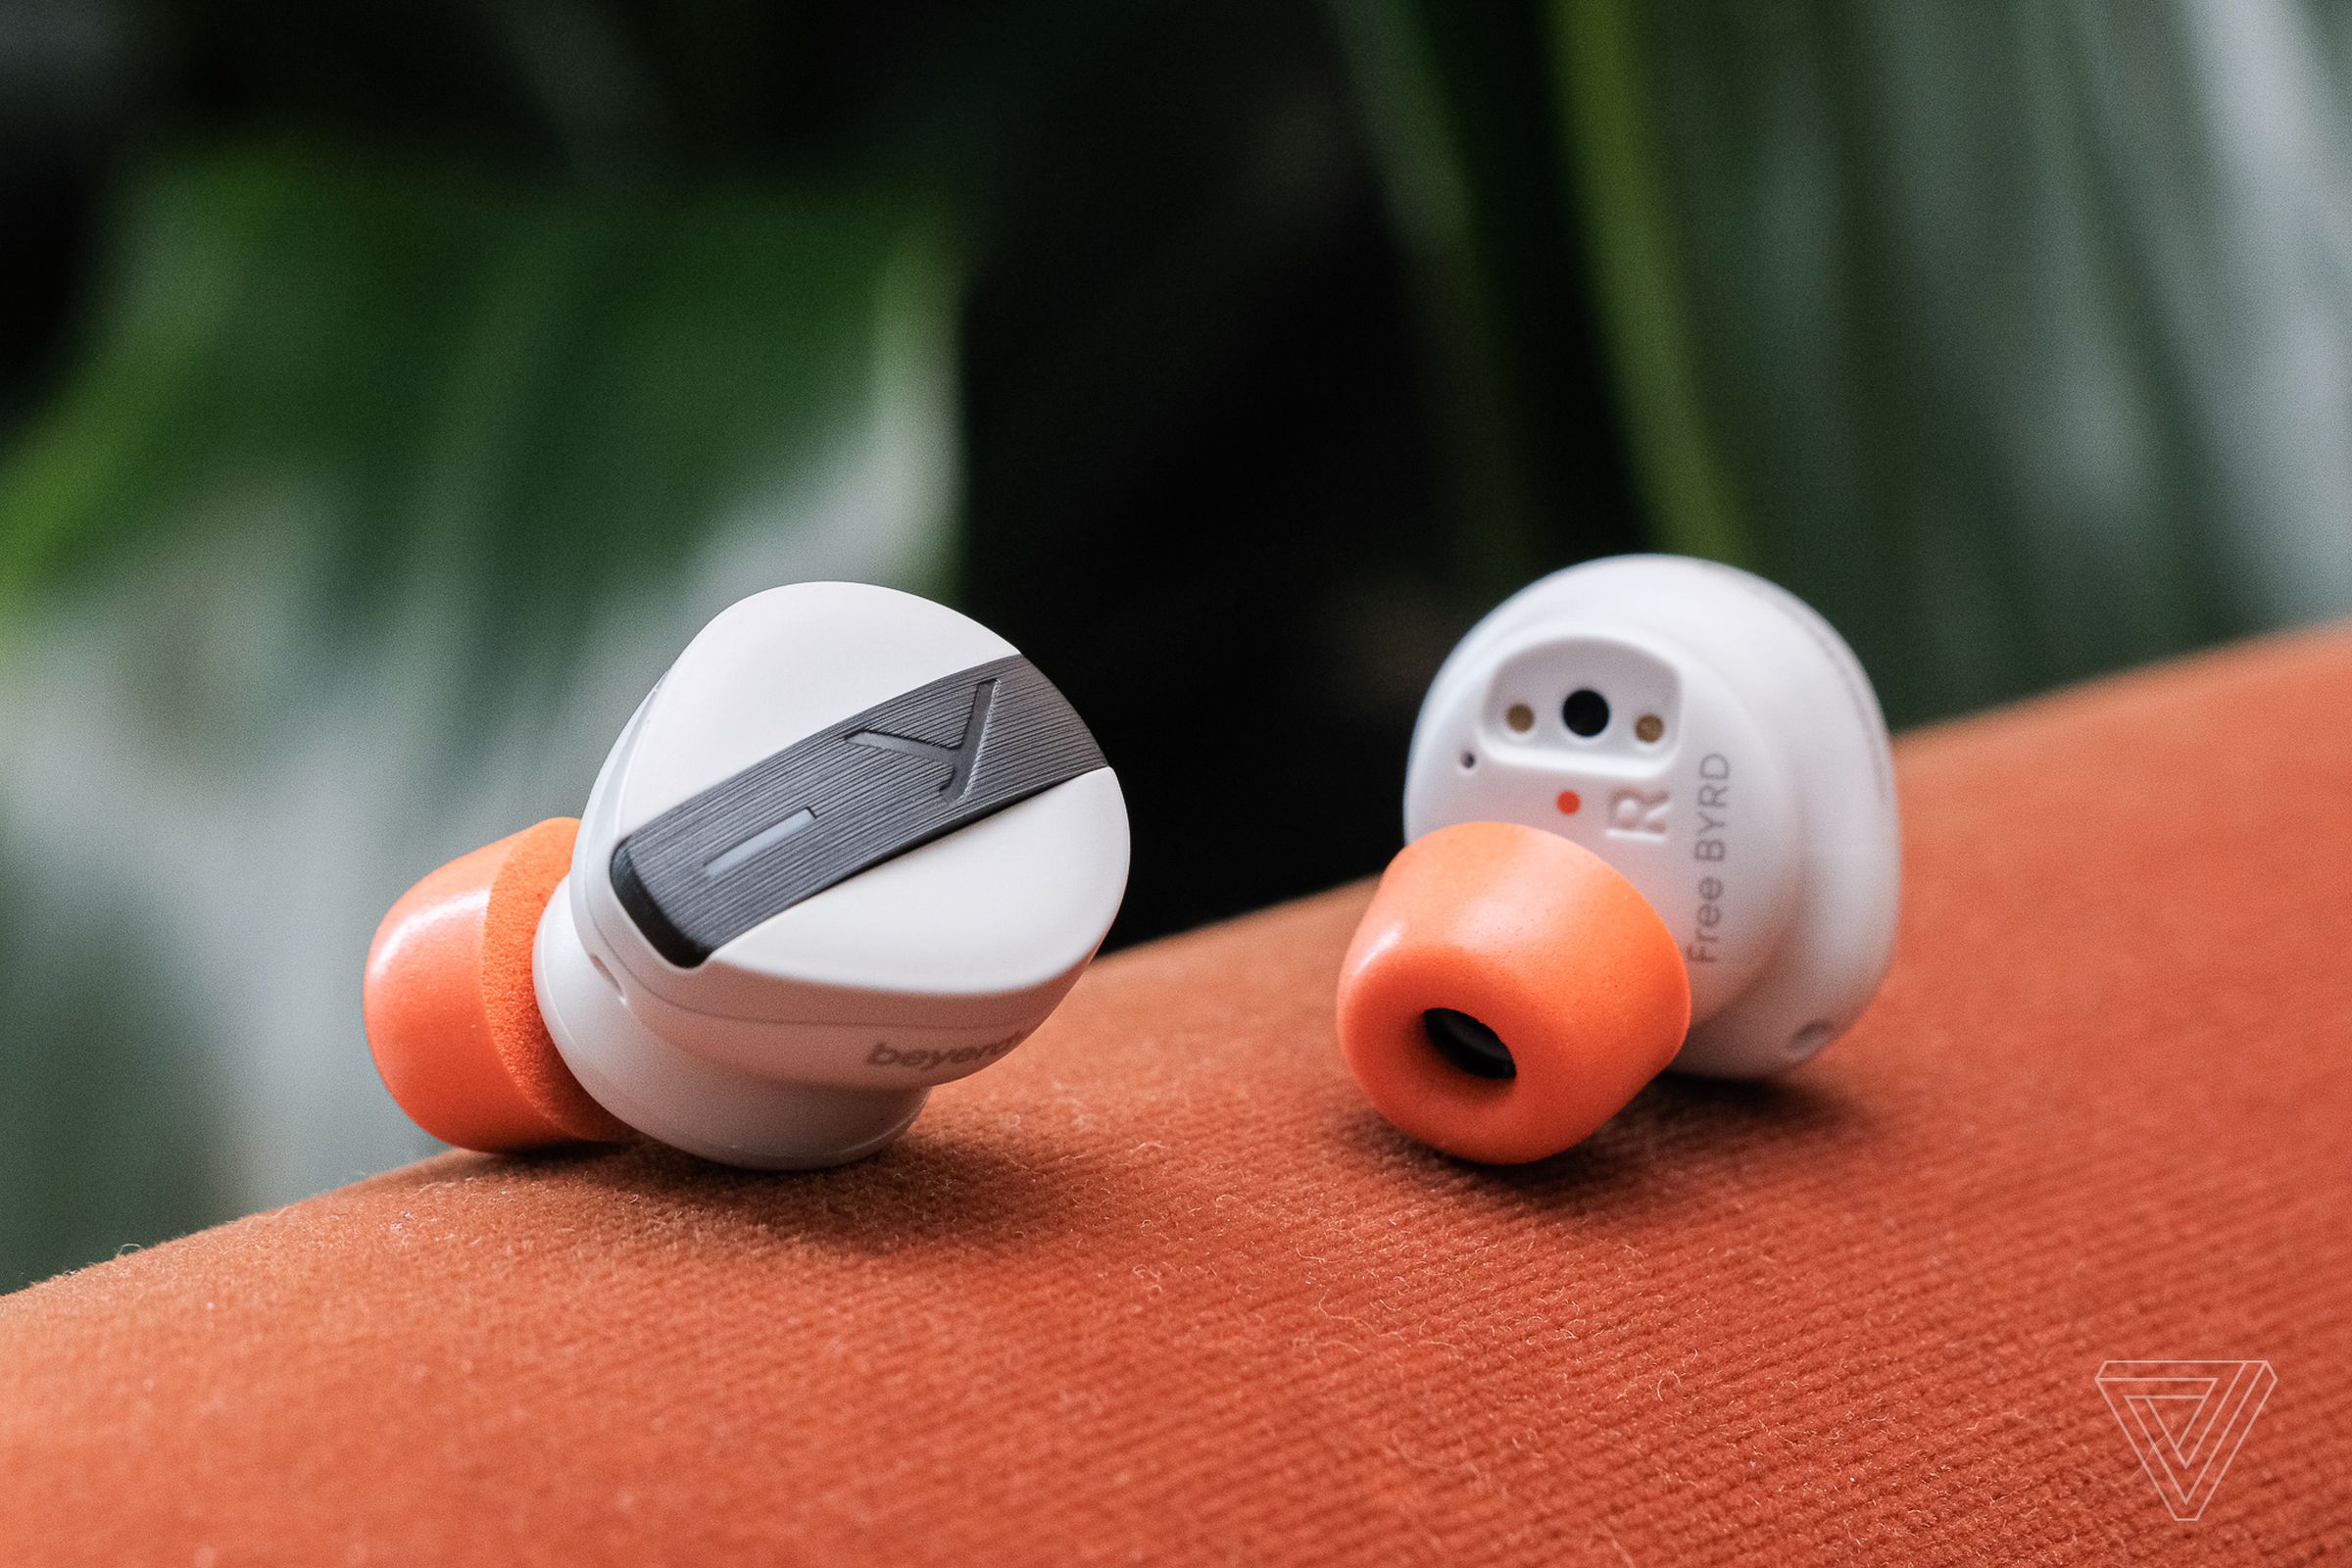 The Free Byrds are Beyerdynamic’s first true wireless earbuds.